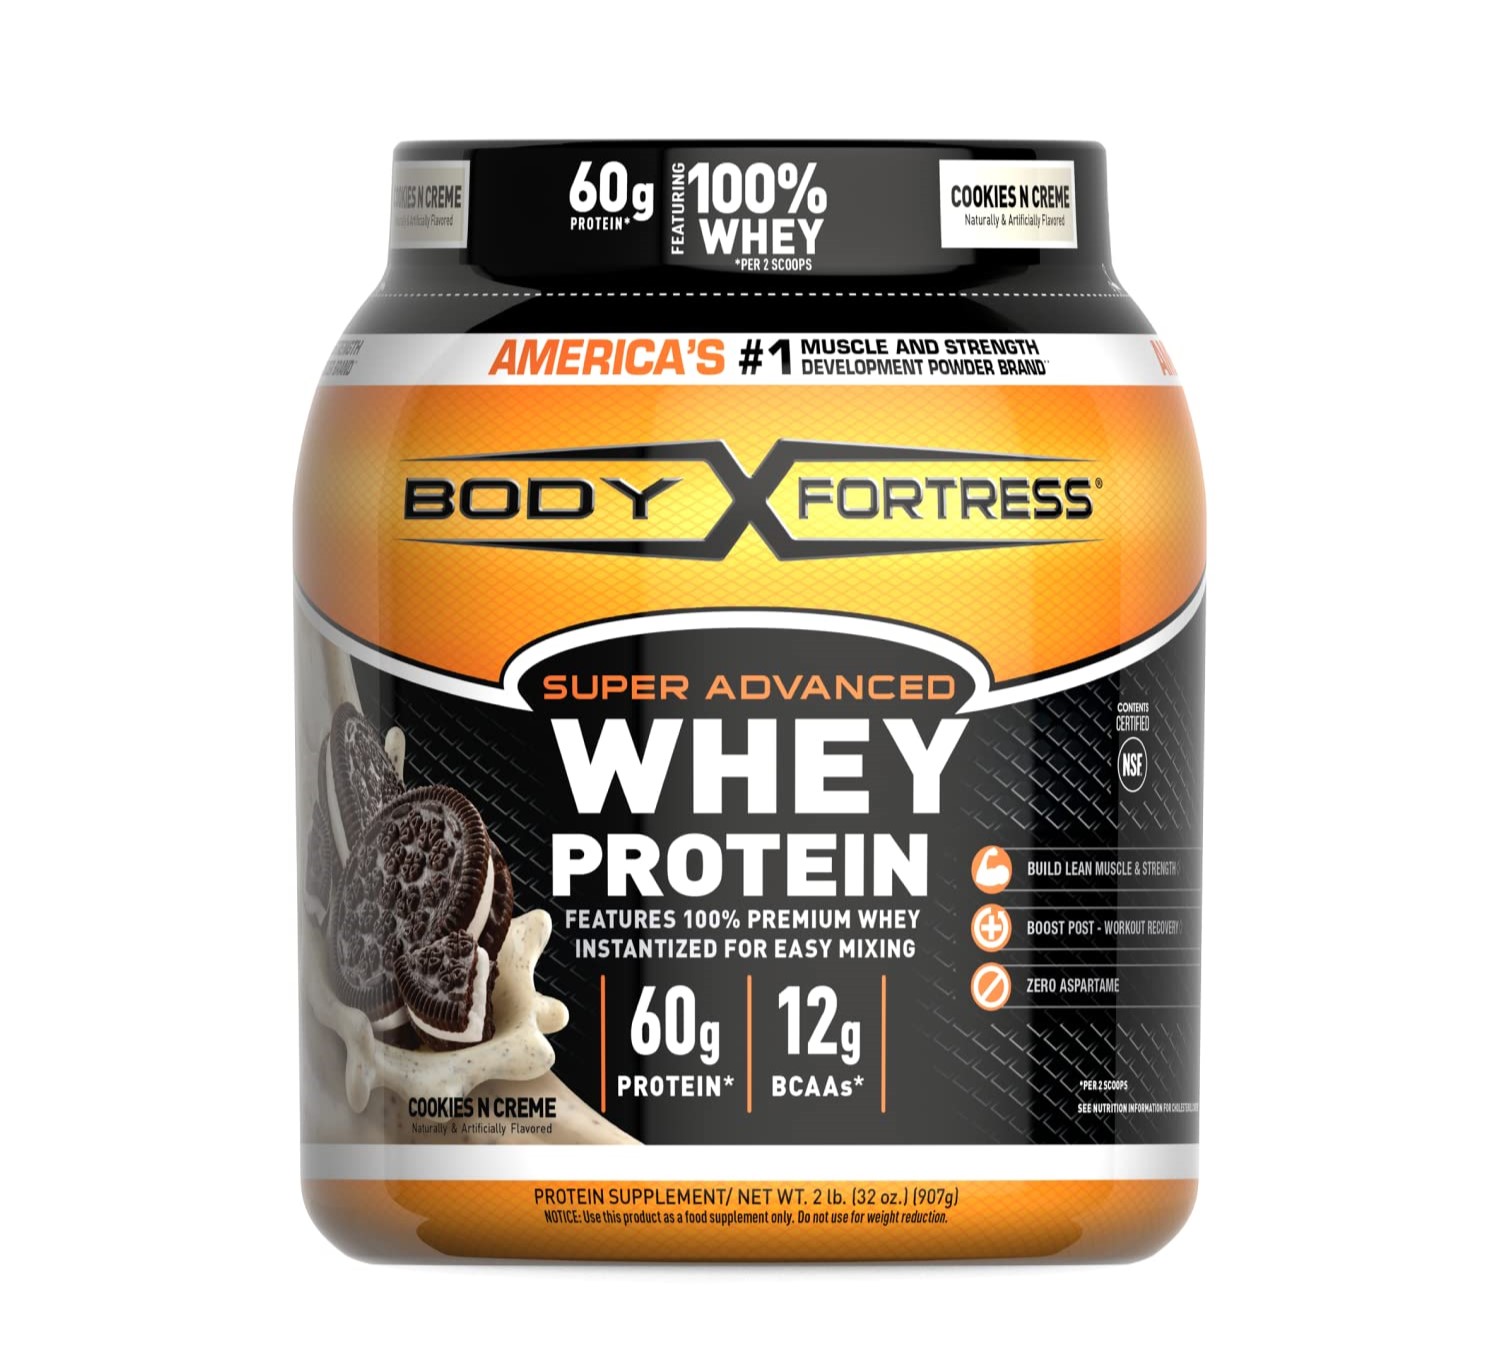 19-body-fortress-nutrition-facts